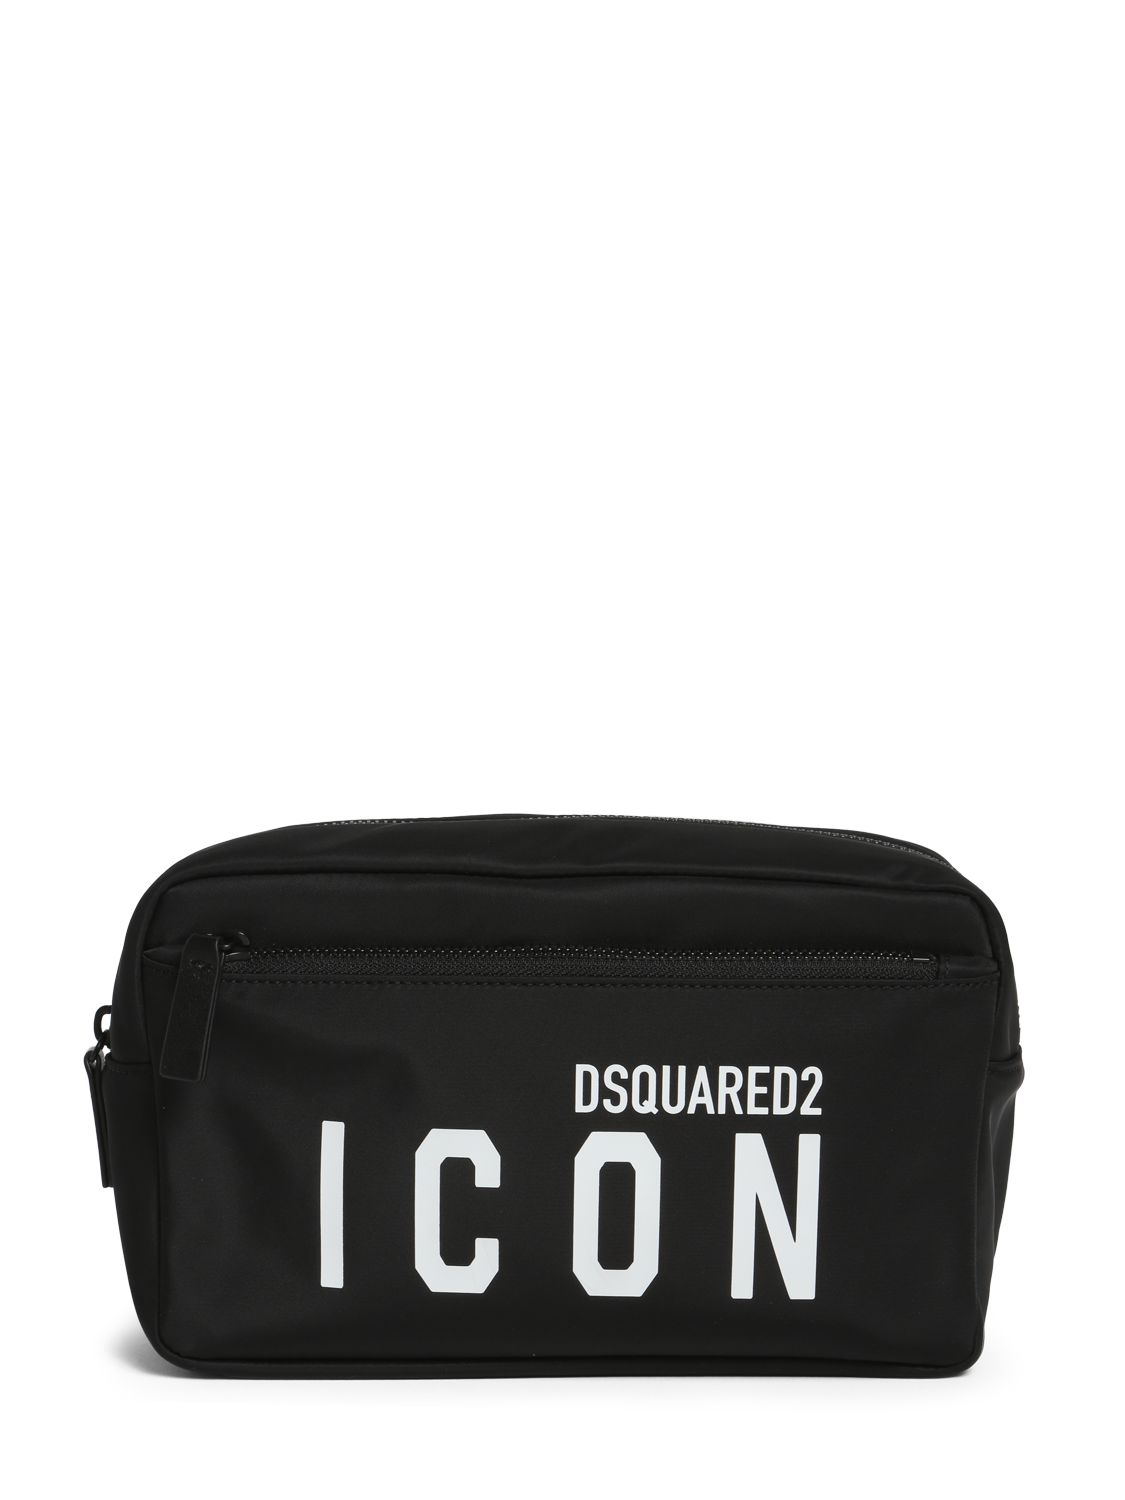 DSQUARED2 Be Icon Toiletry Bag | Smart Closet